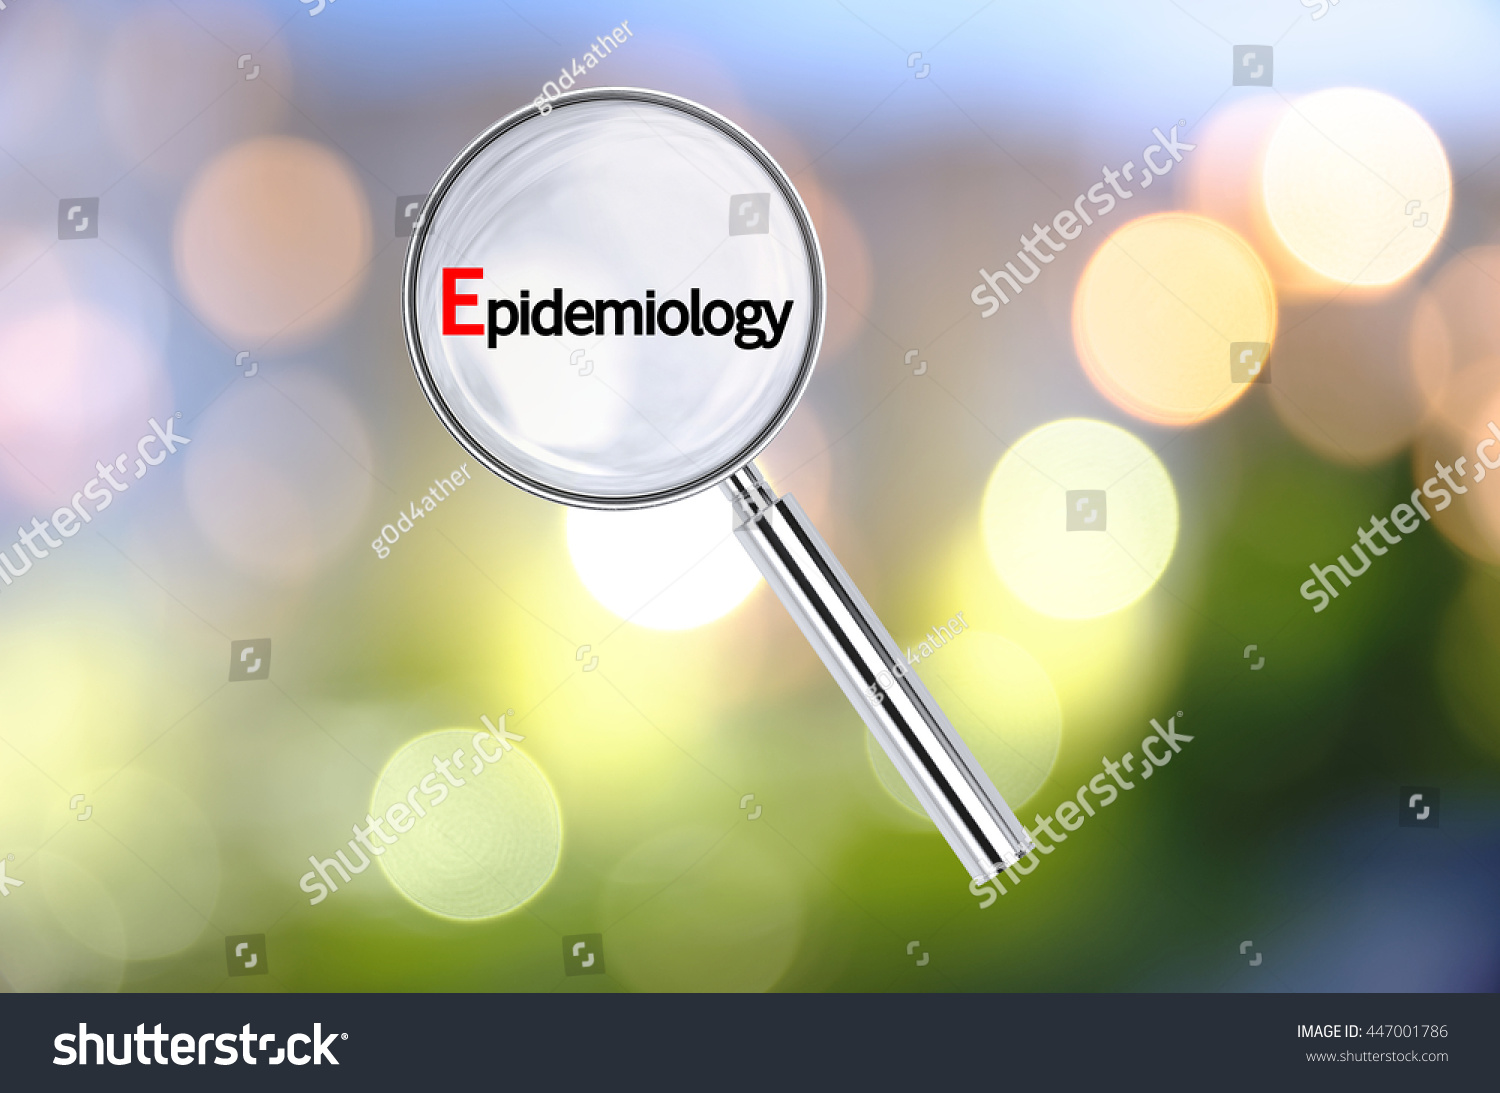 Epidemiology Pictures  Download Free Images on Unsplash